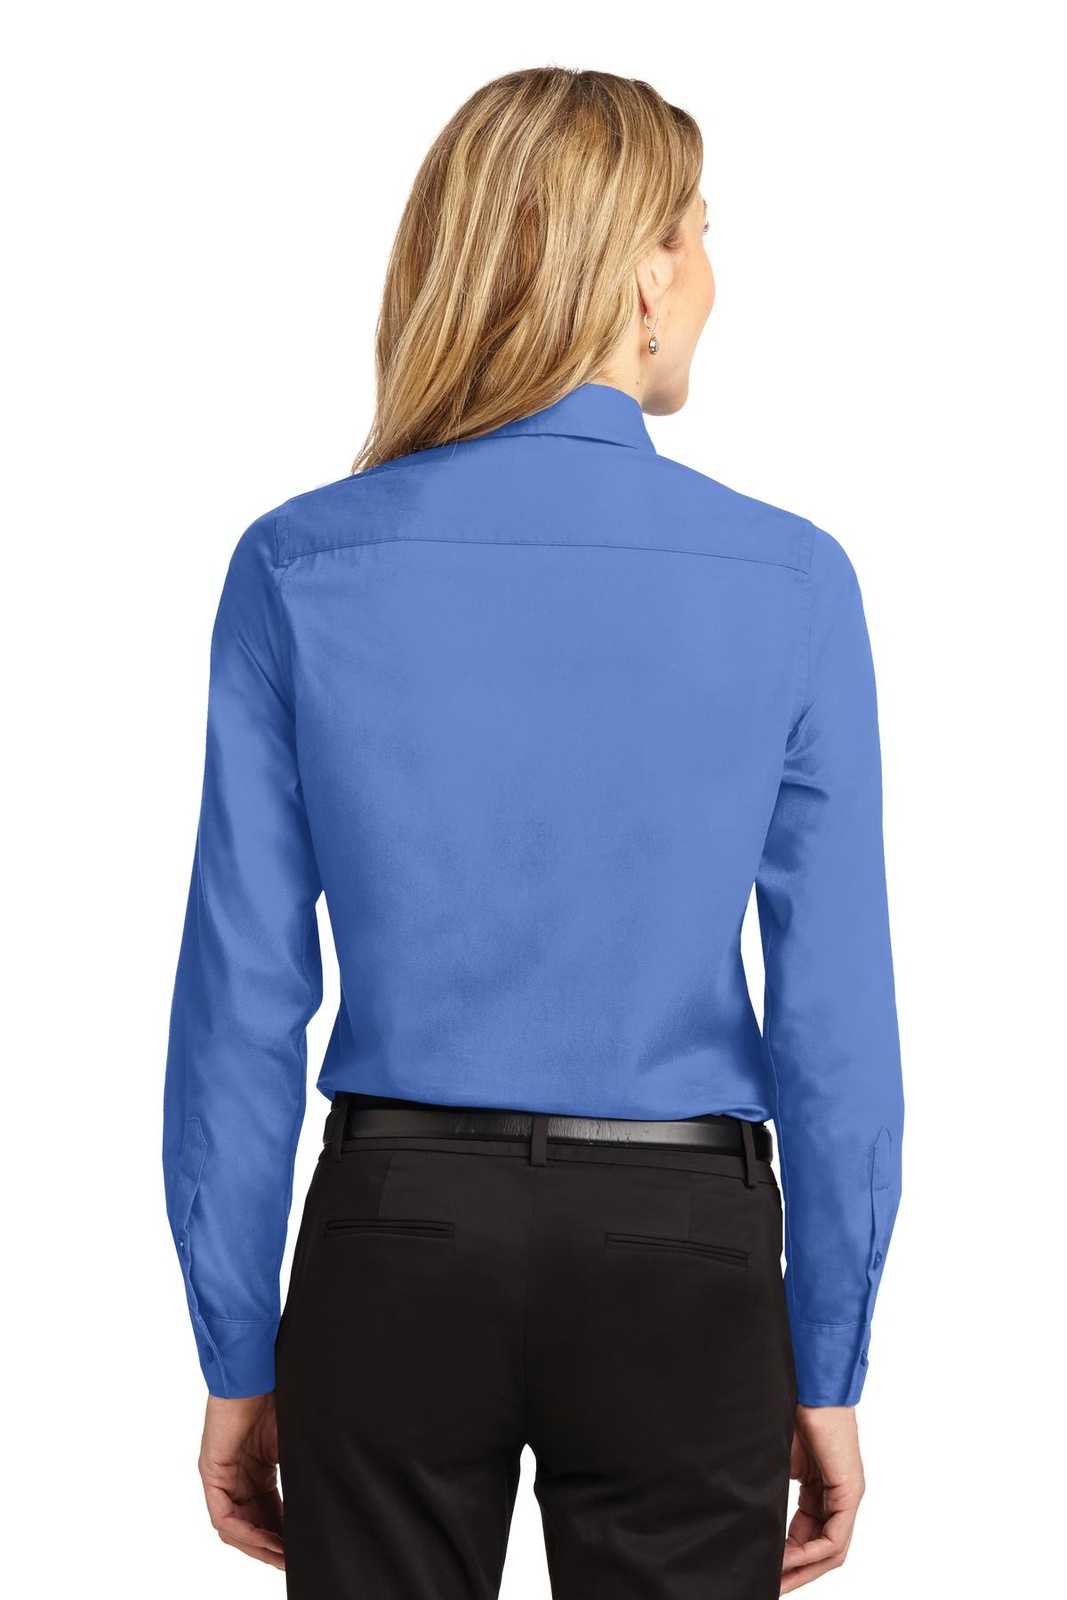 Port Authority L608 Ladies Long Sleeve Easy Care Shirt - Ultramarine Blue - HIT a Double - 2